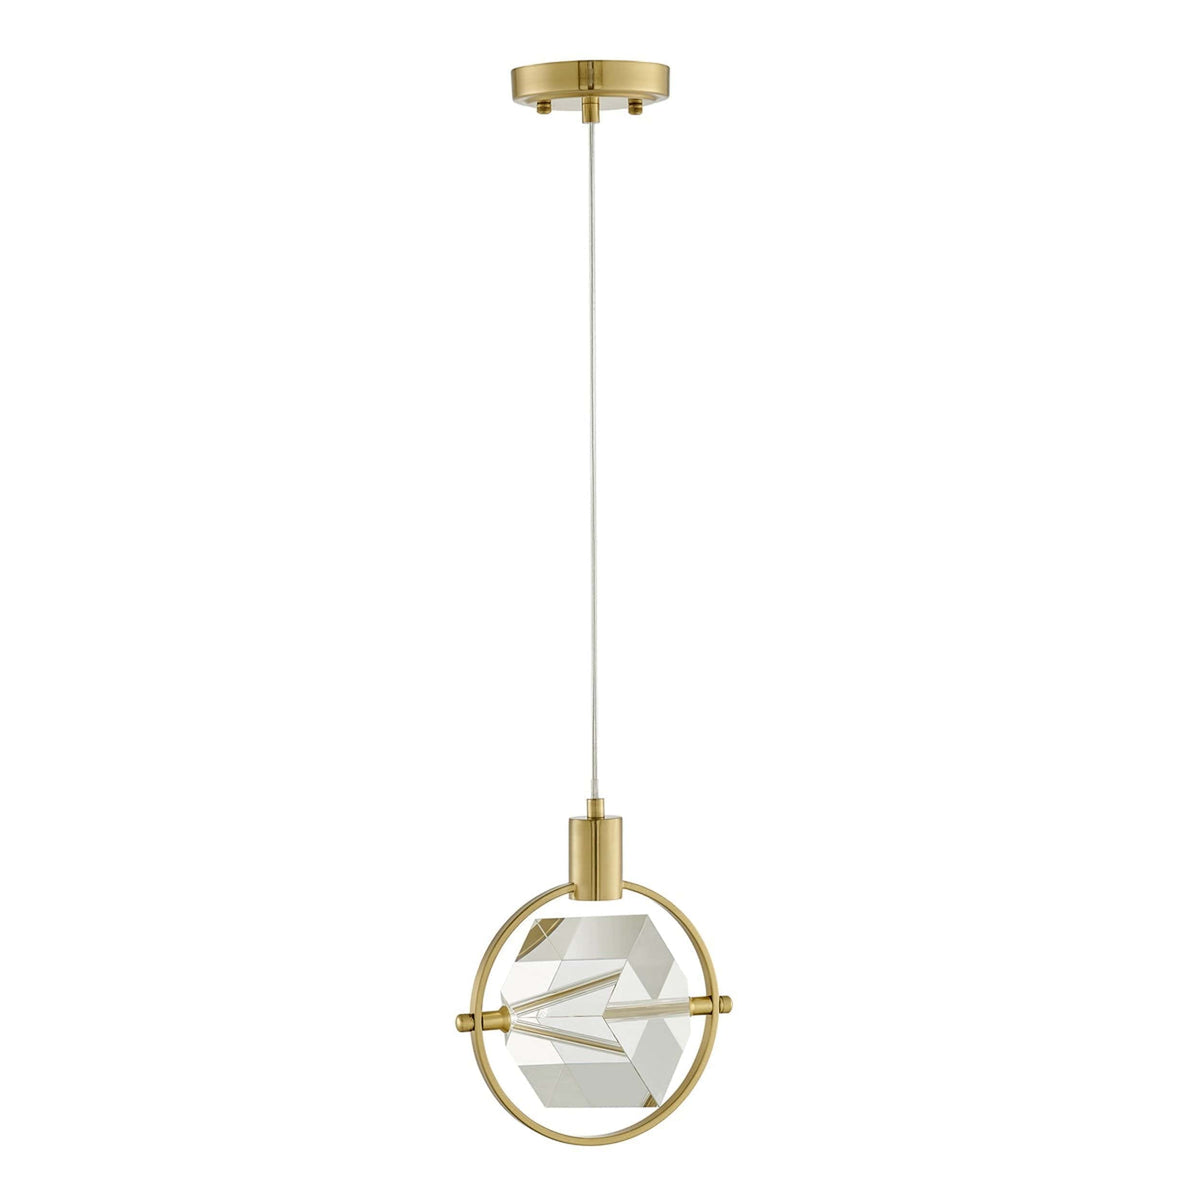 Hollywood Cube 1 Light Pendant in Gold